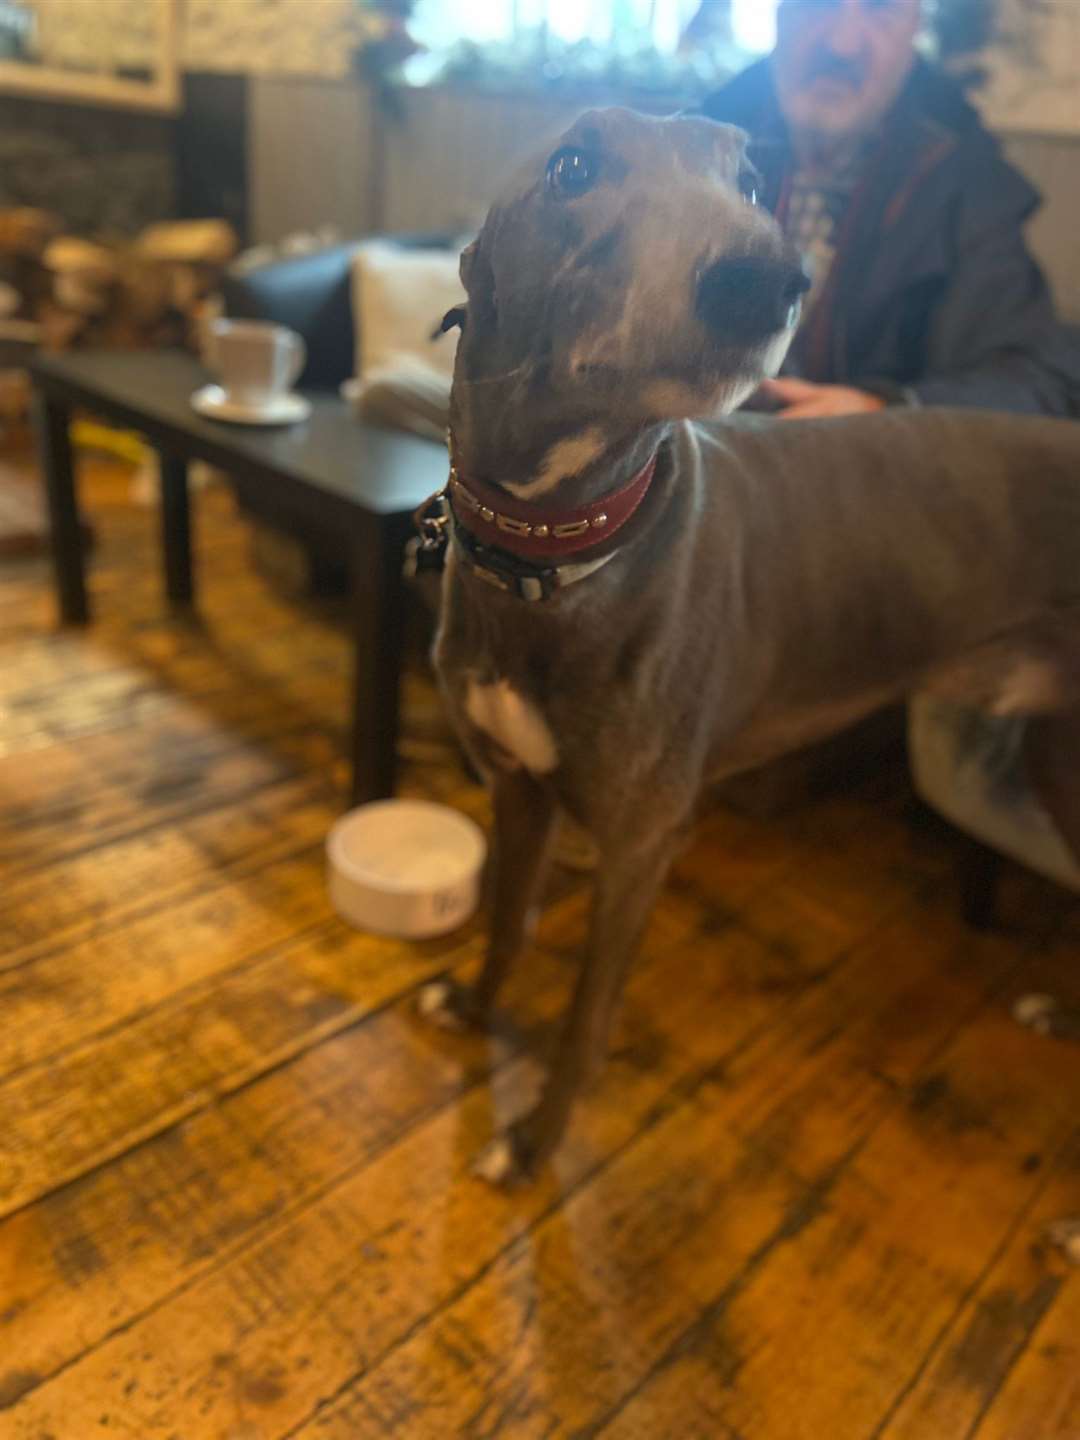 Roscoe is one of many dogs to enjoy a meal at The Kings Arms in Offham, near West Malling